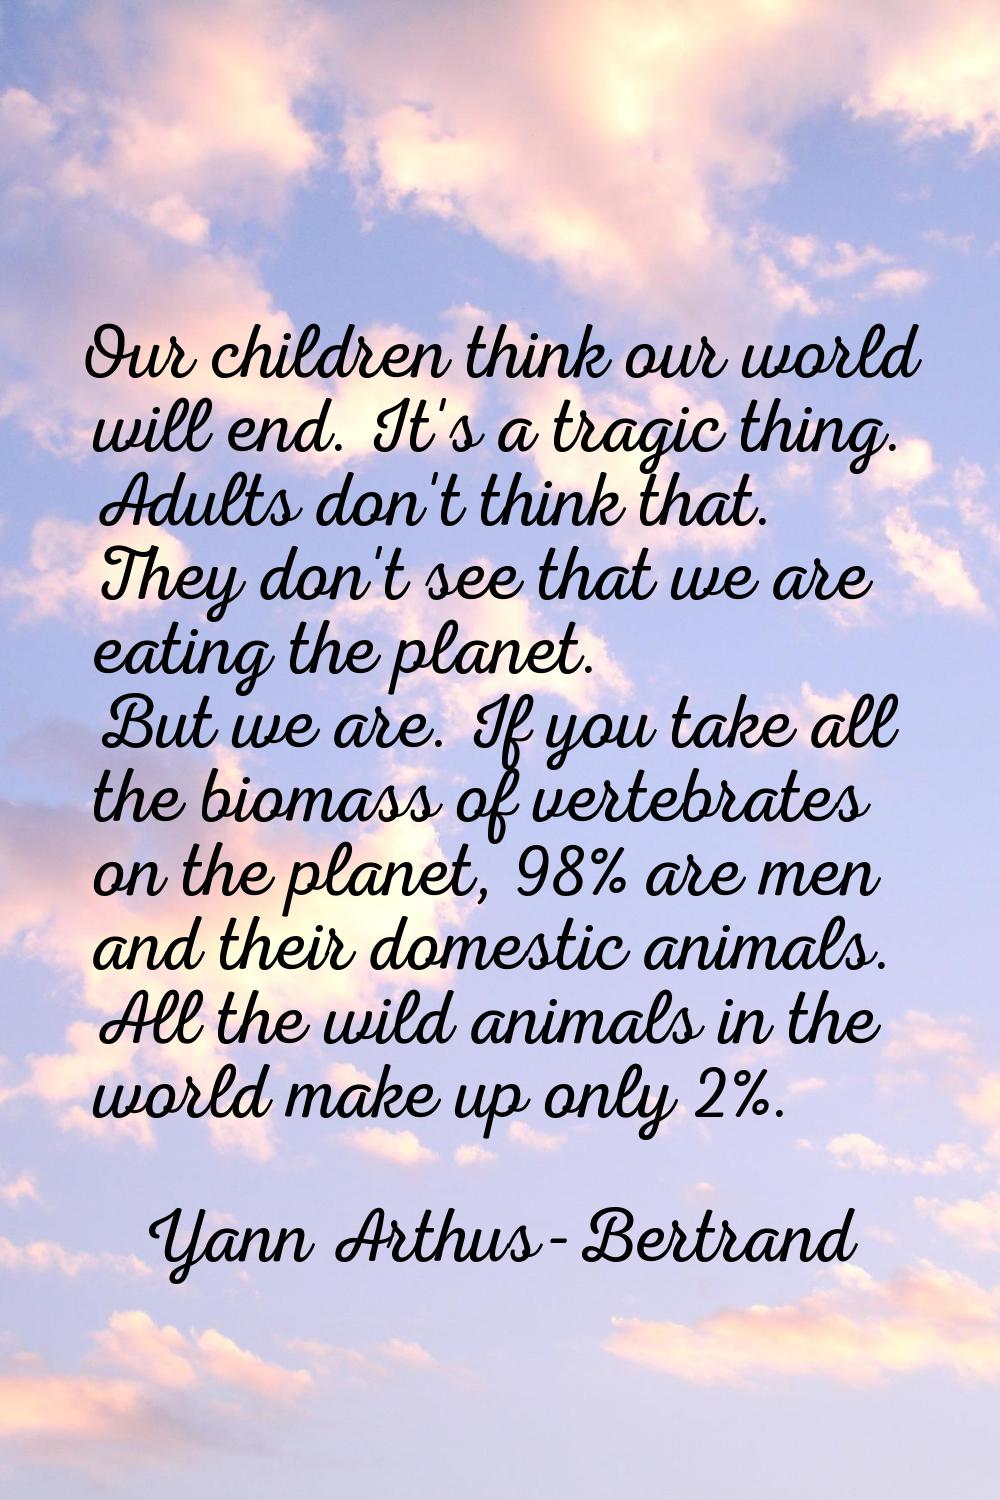 Our children think our world will end. It's a tragic thing. Adults don't think that. They don't see